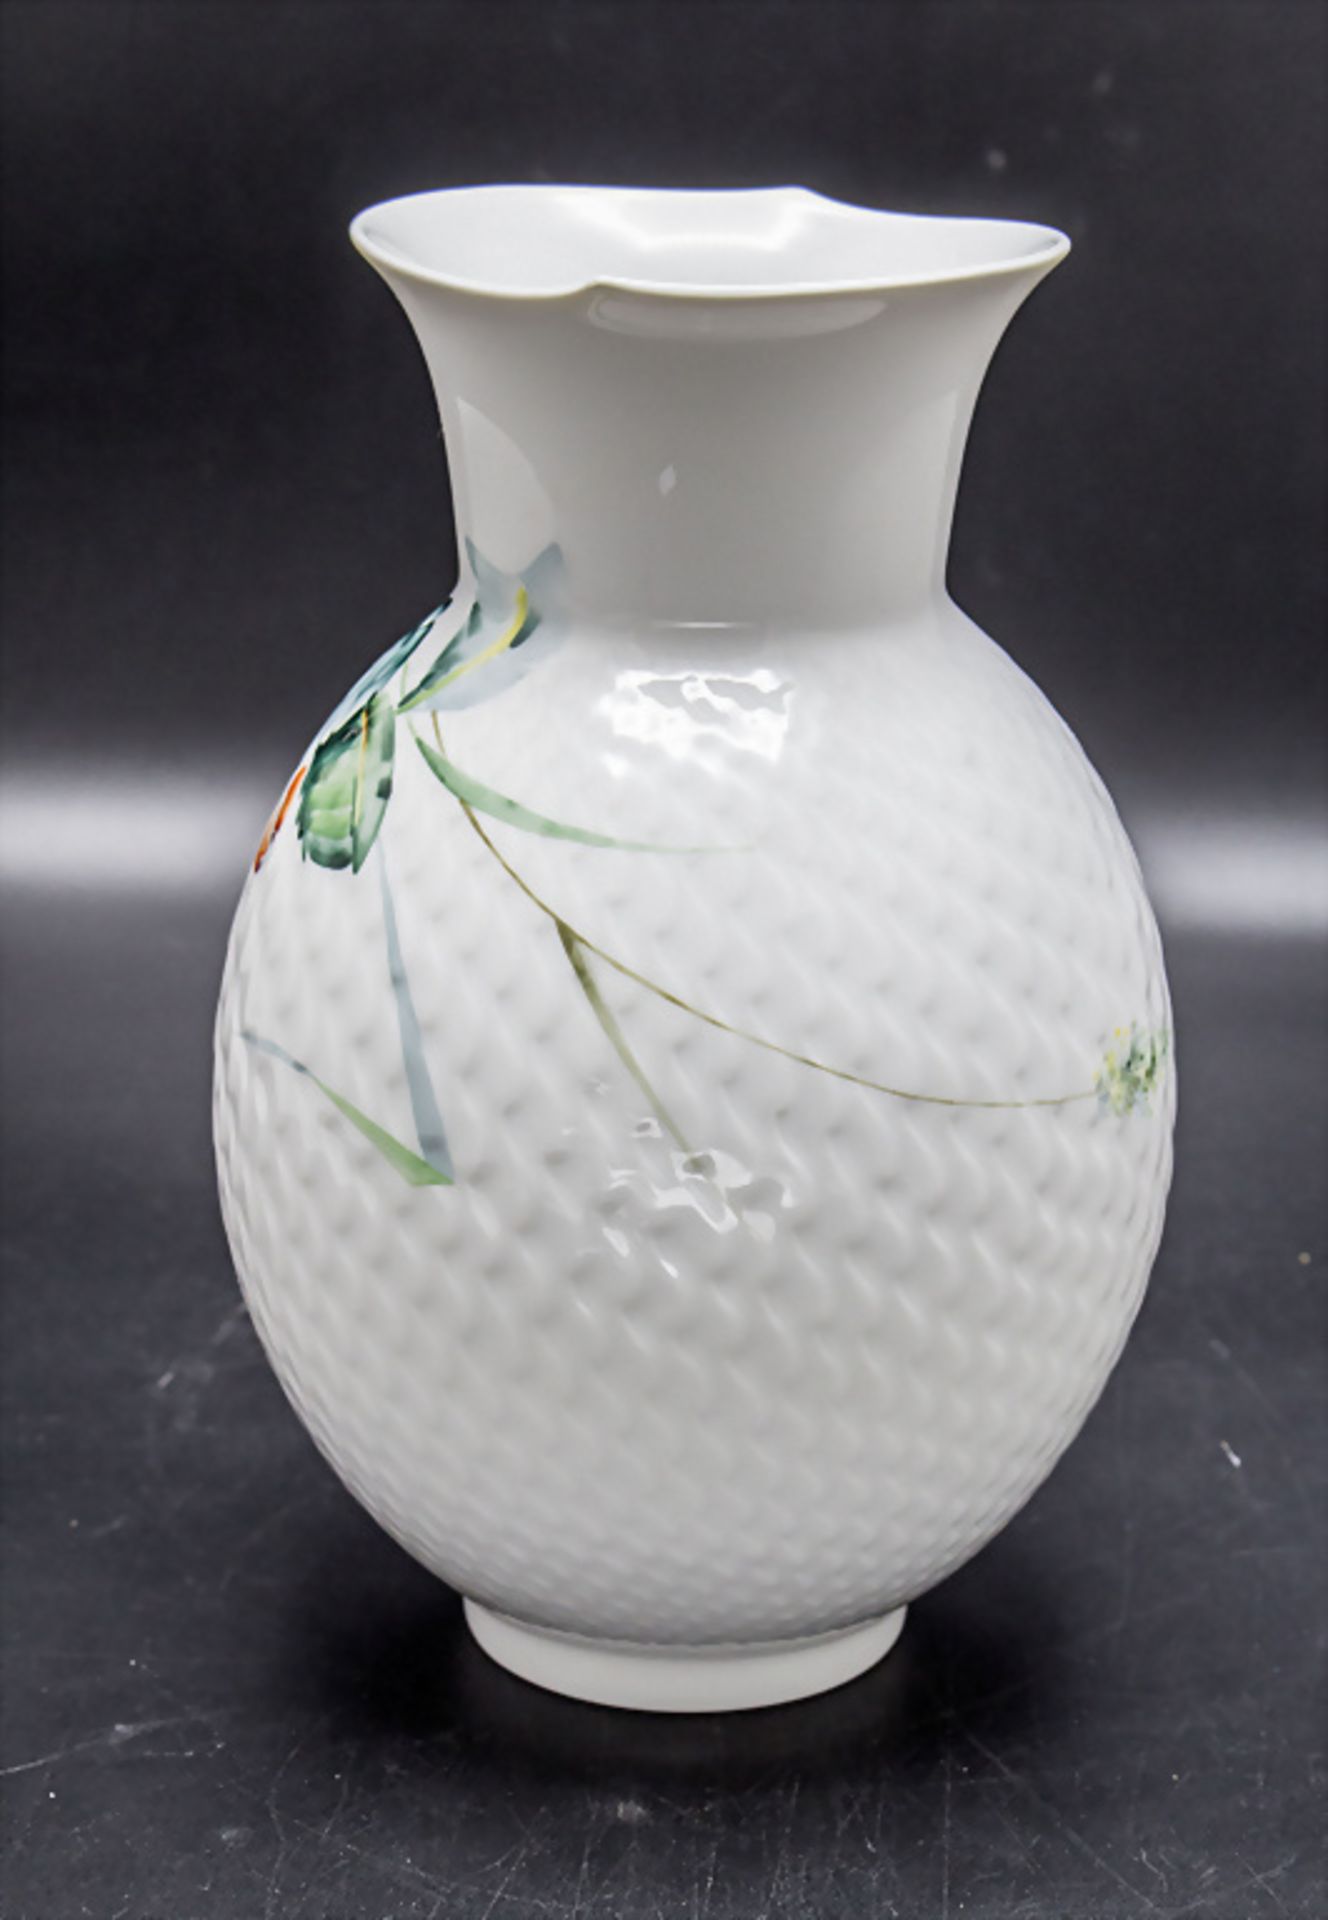 Vase Wellenspiel 'Waldflora mit Insekten' / A vase with rosechips and insect, Sabine Wachs, ... - Image 2 of 4